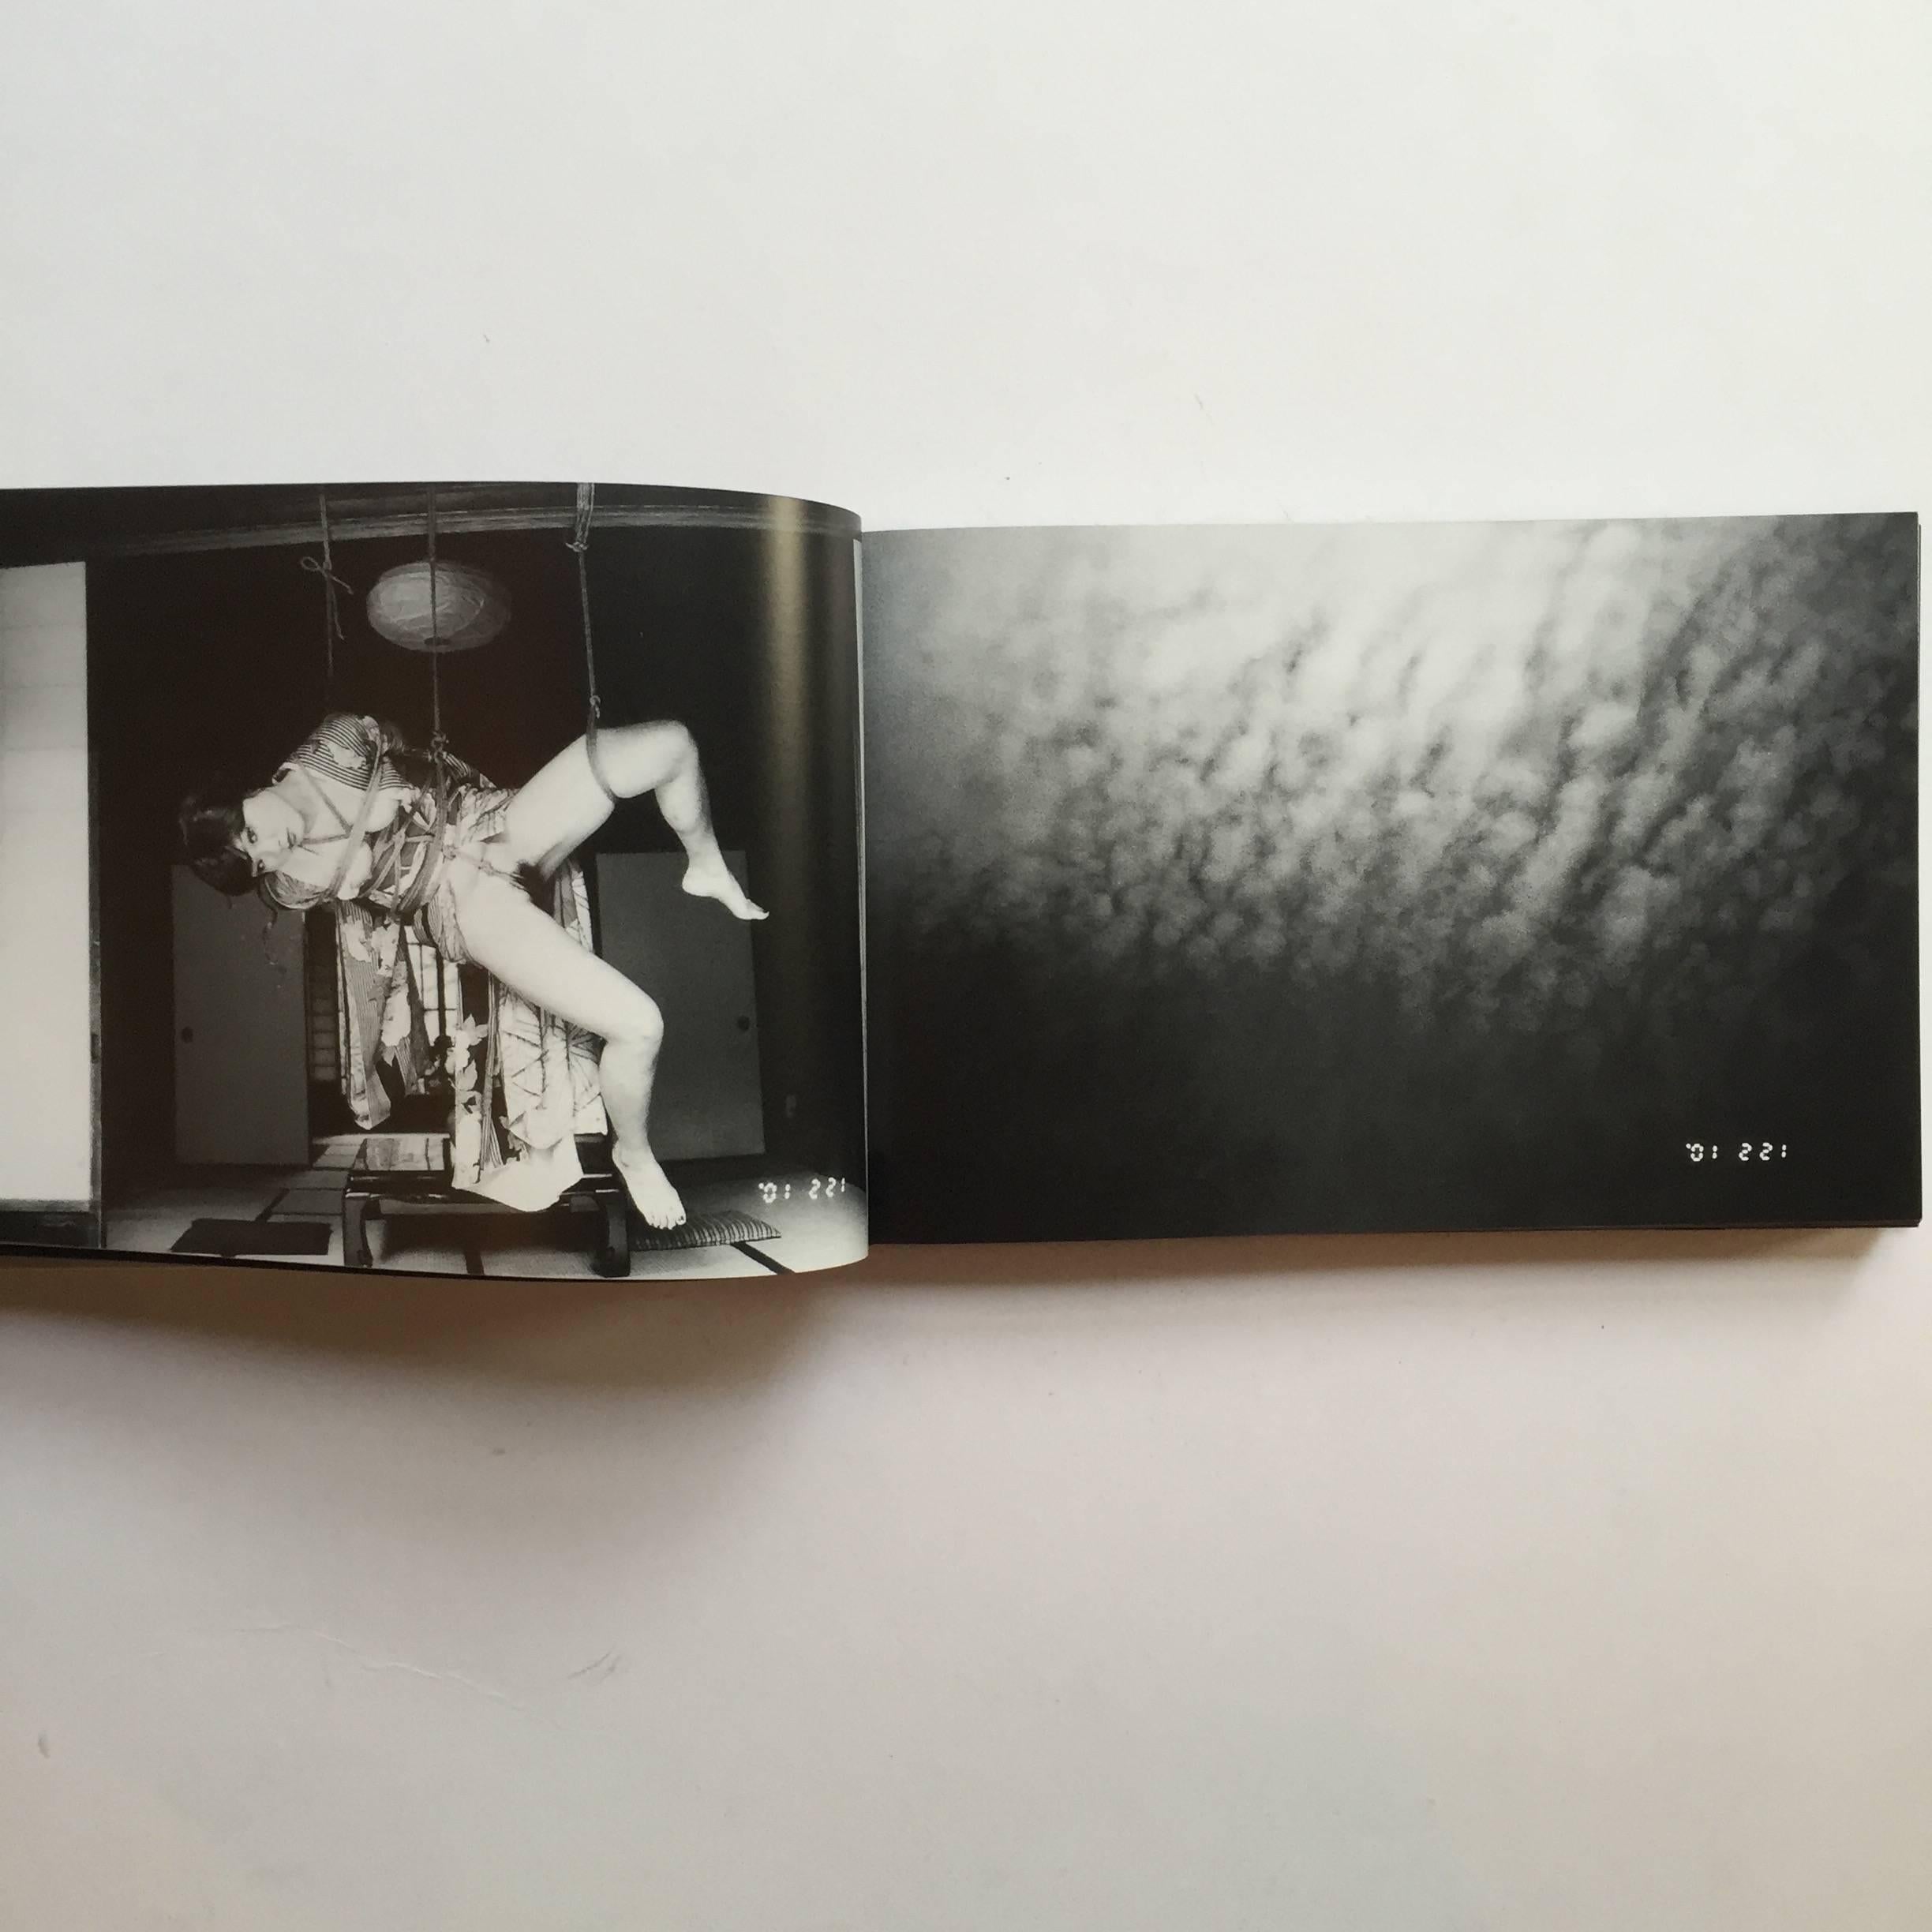 First edition, published by Aat Room, 2002.

A photo-diary collection of Araki’s works created over the course of 2001. Digitally dated, full bleed black and white images in typical Araki style - women suspended in bondage ropes, painted nudes and